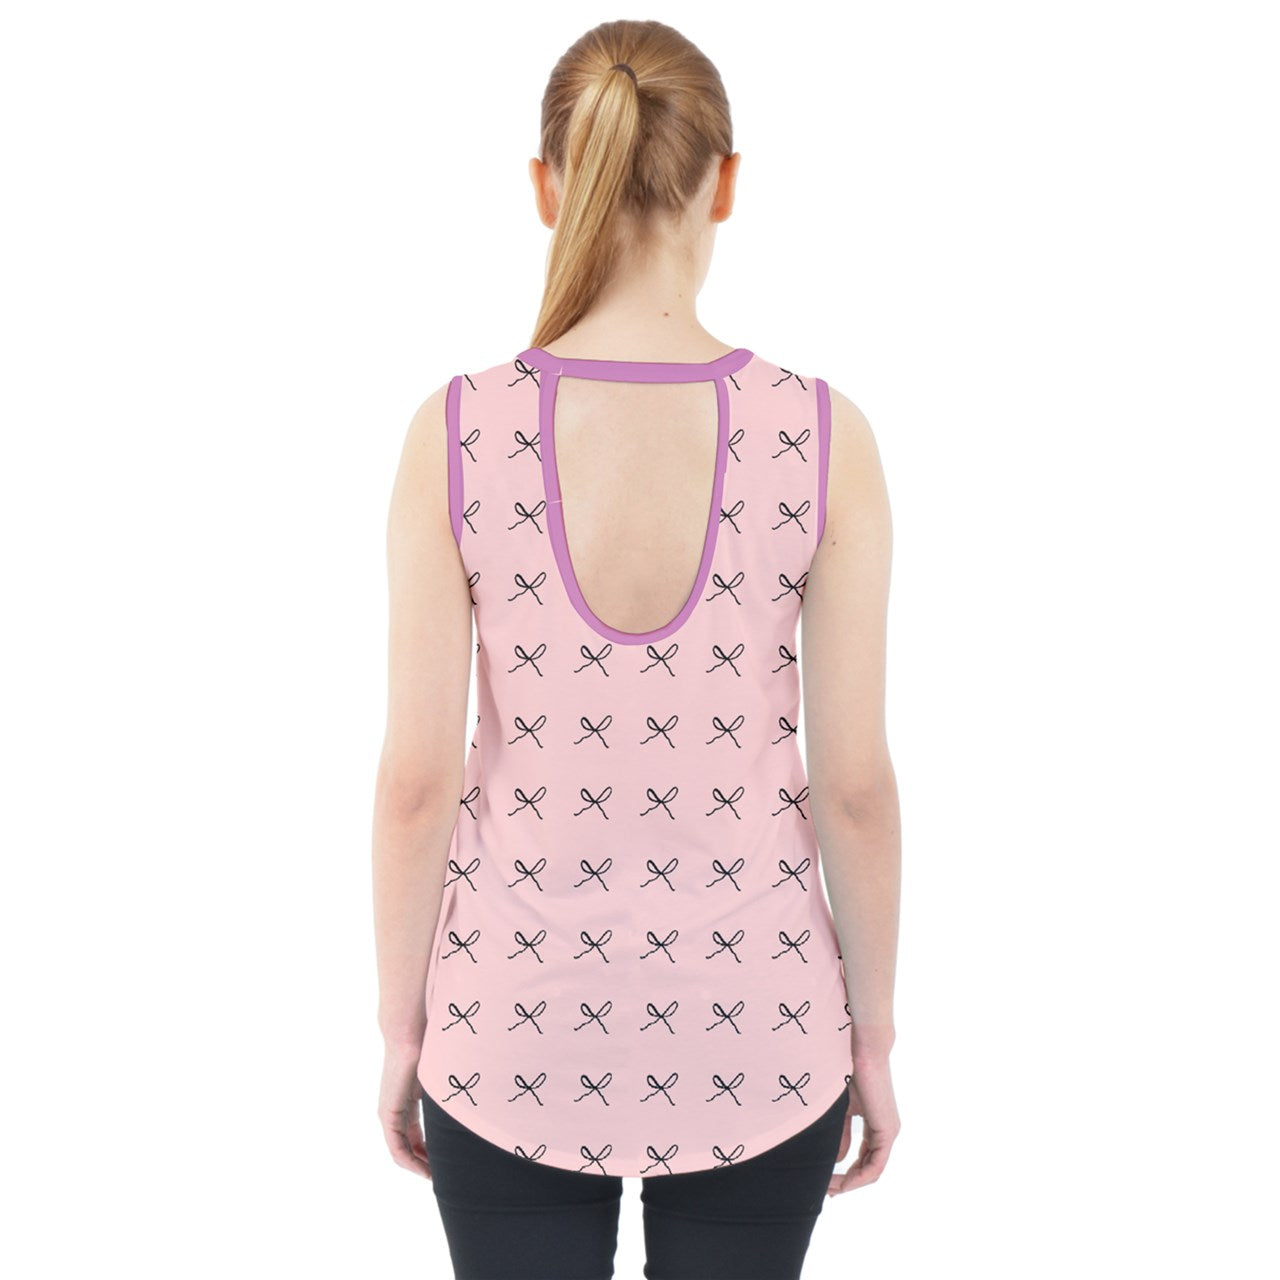 Rows of bows lite Cut Out Tank Top